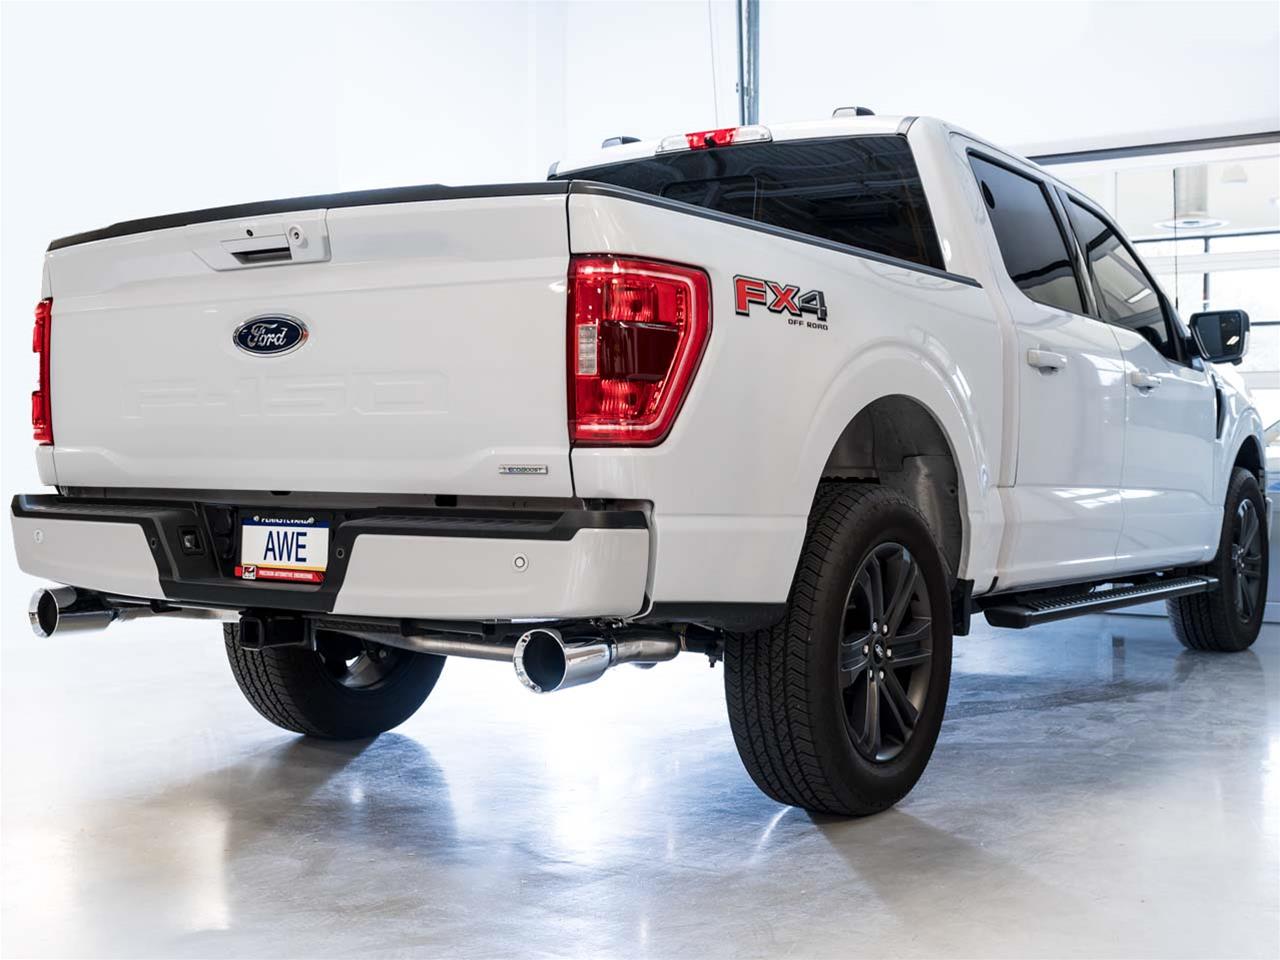 2022 FORD F 150 AWE Tuning 3015-32105 AWE Tuning 0FG Exhaust Systems ...